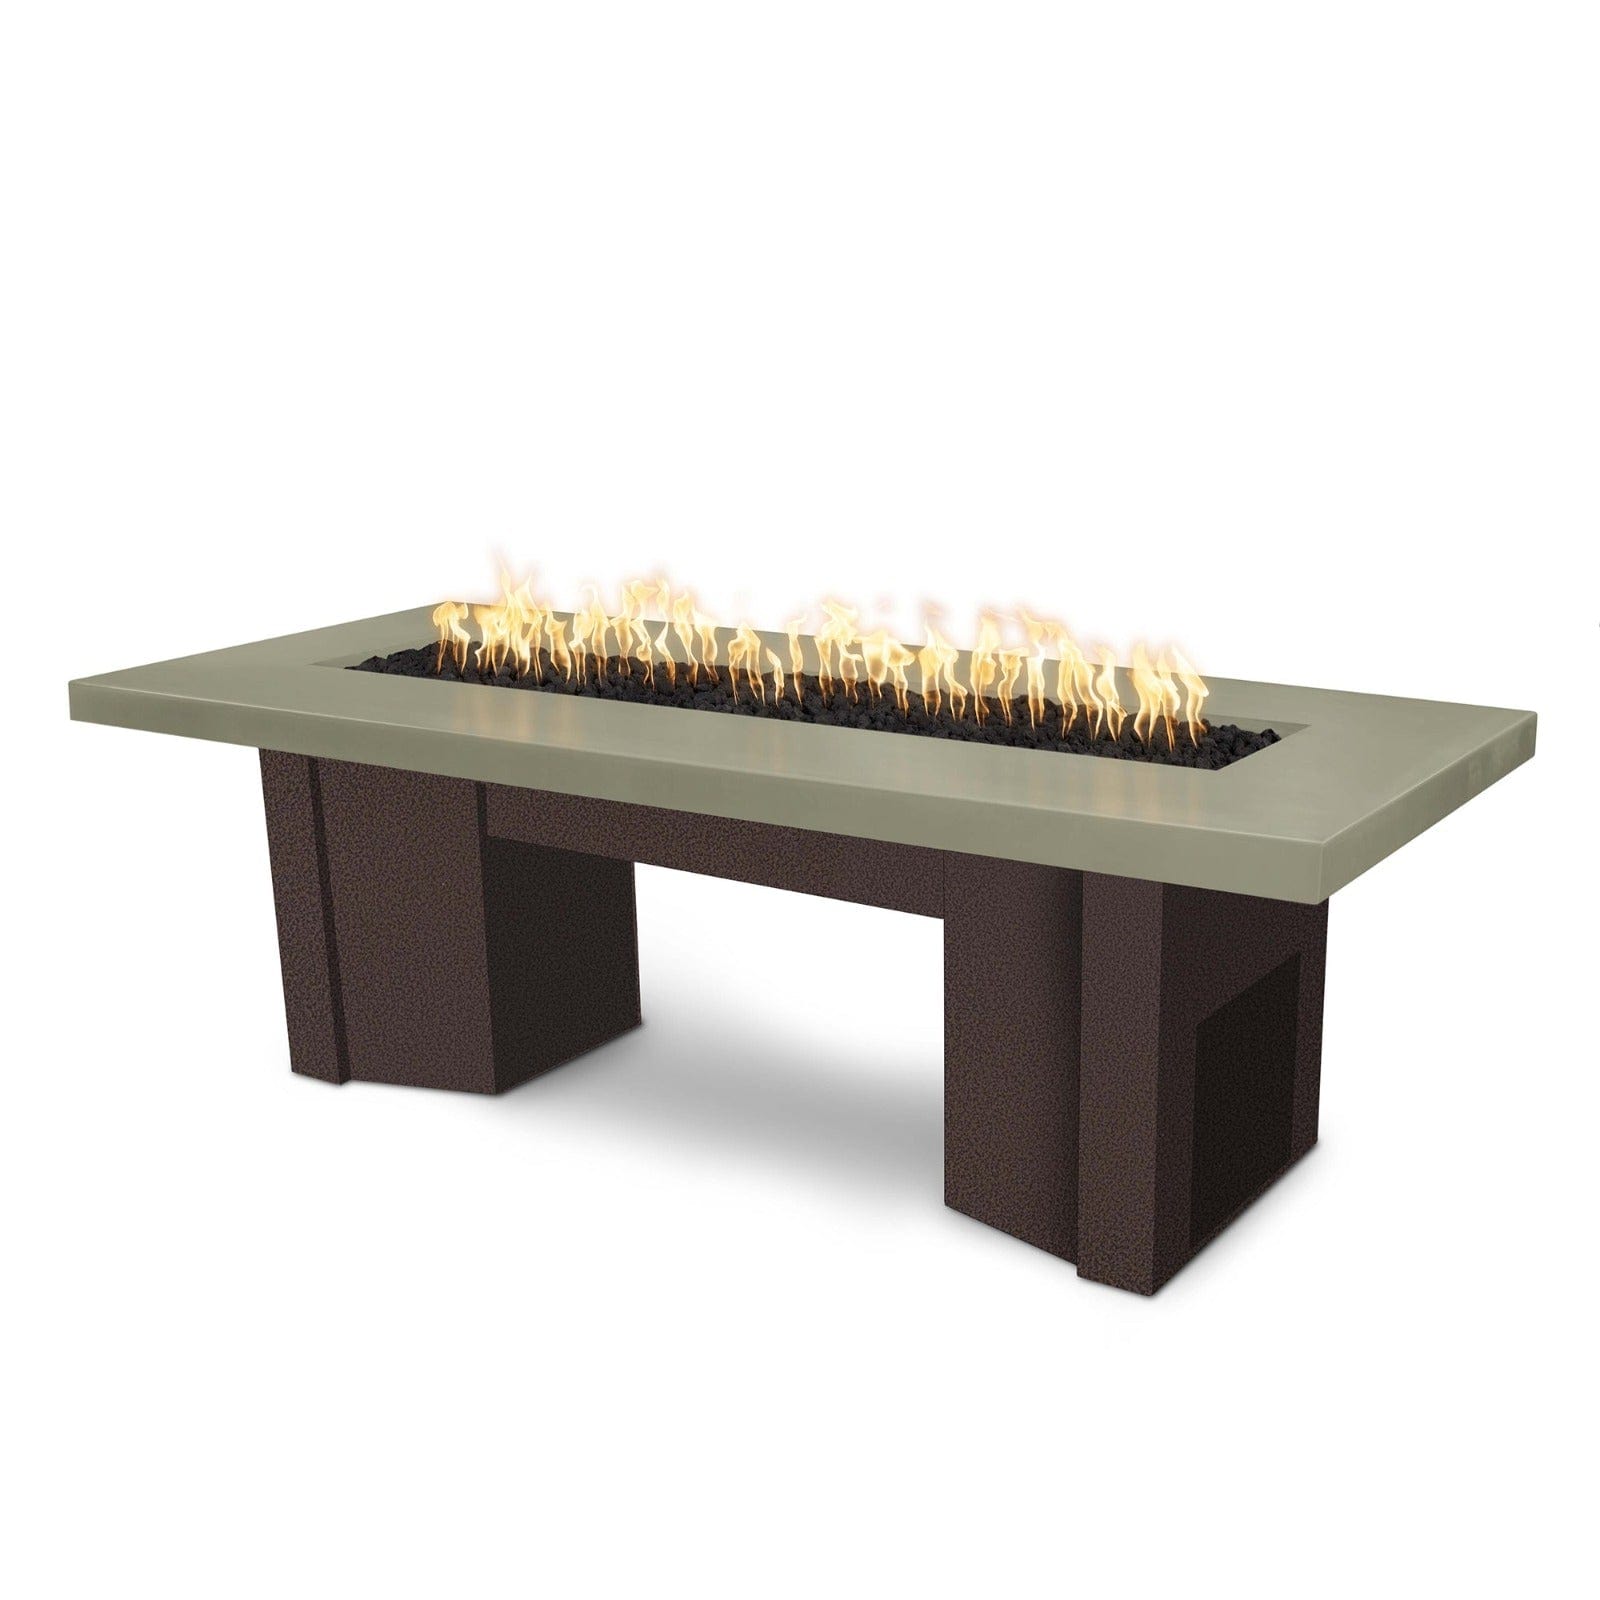 The Outdoor Plus Fire Features Ash (-ASH) / Copper Vein Powder Coated Steel (-CPV) The Outdoor Plus 60" Alameda Fire Table Smooth Concrete in Liquid Propane - 110V Plug & Play Electronic Ignition / OPT-ALMGFRC60EKIT-LP